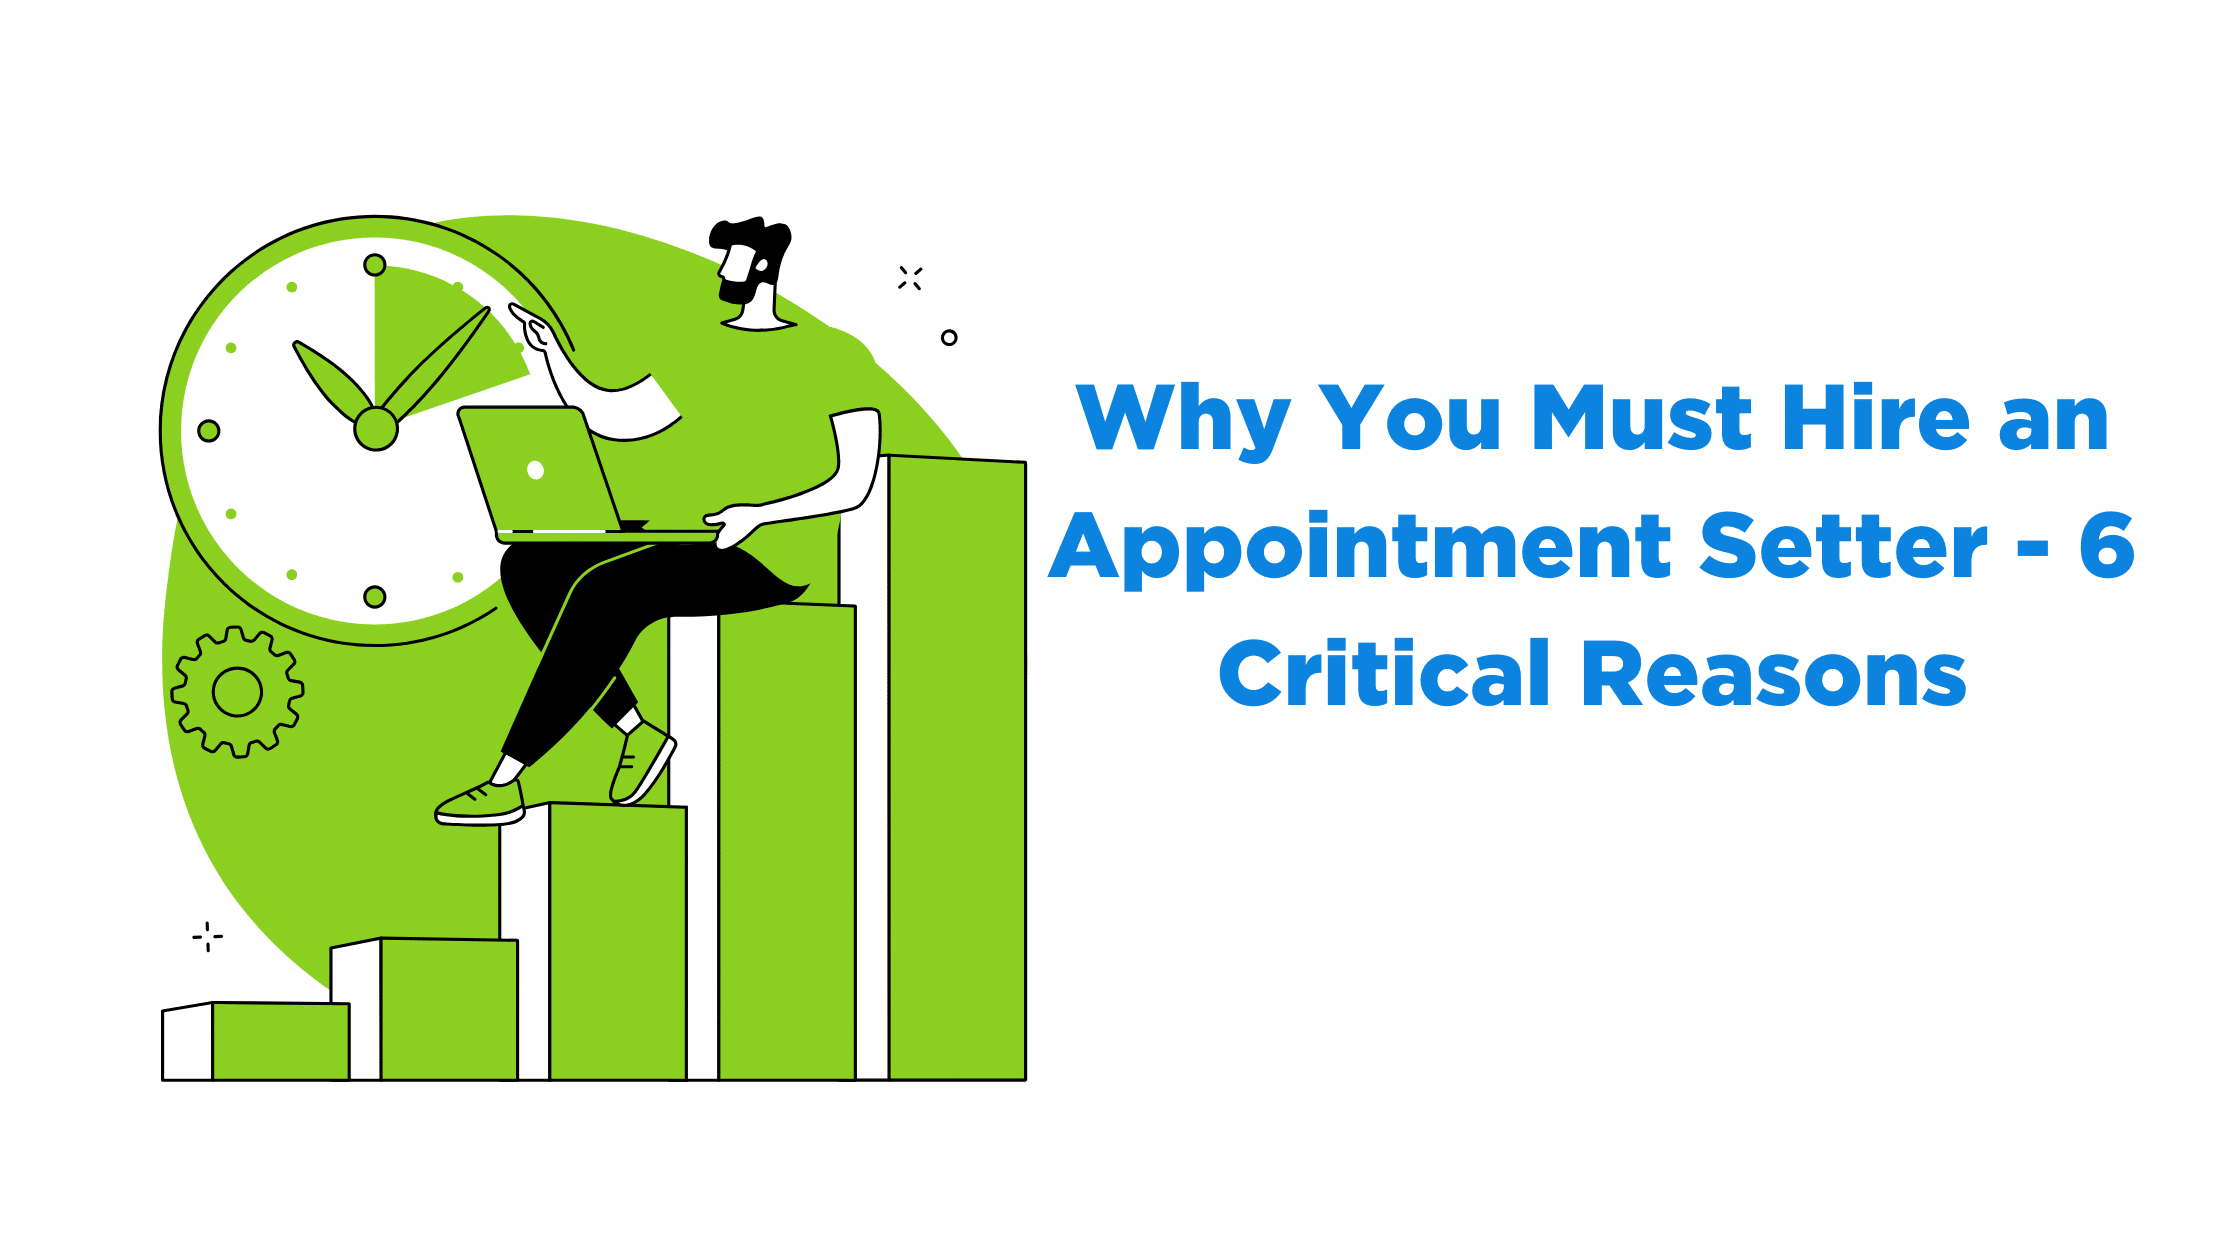 Why You Must Hire an Appointment Setter